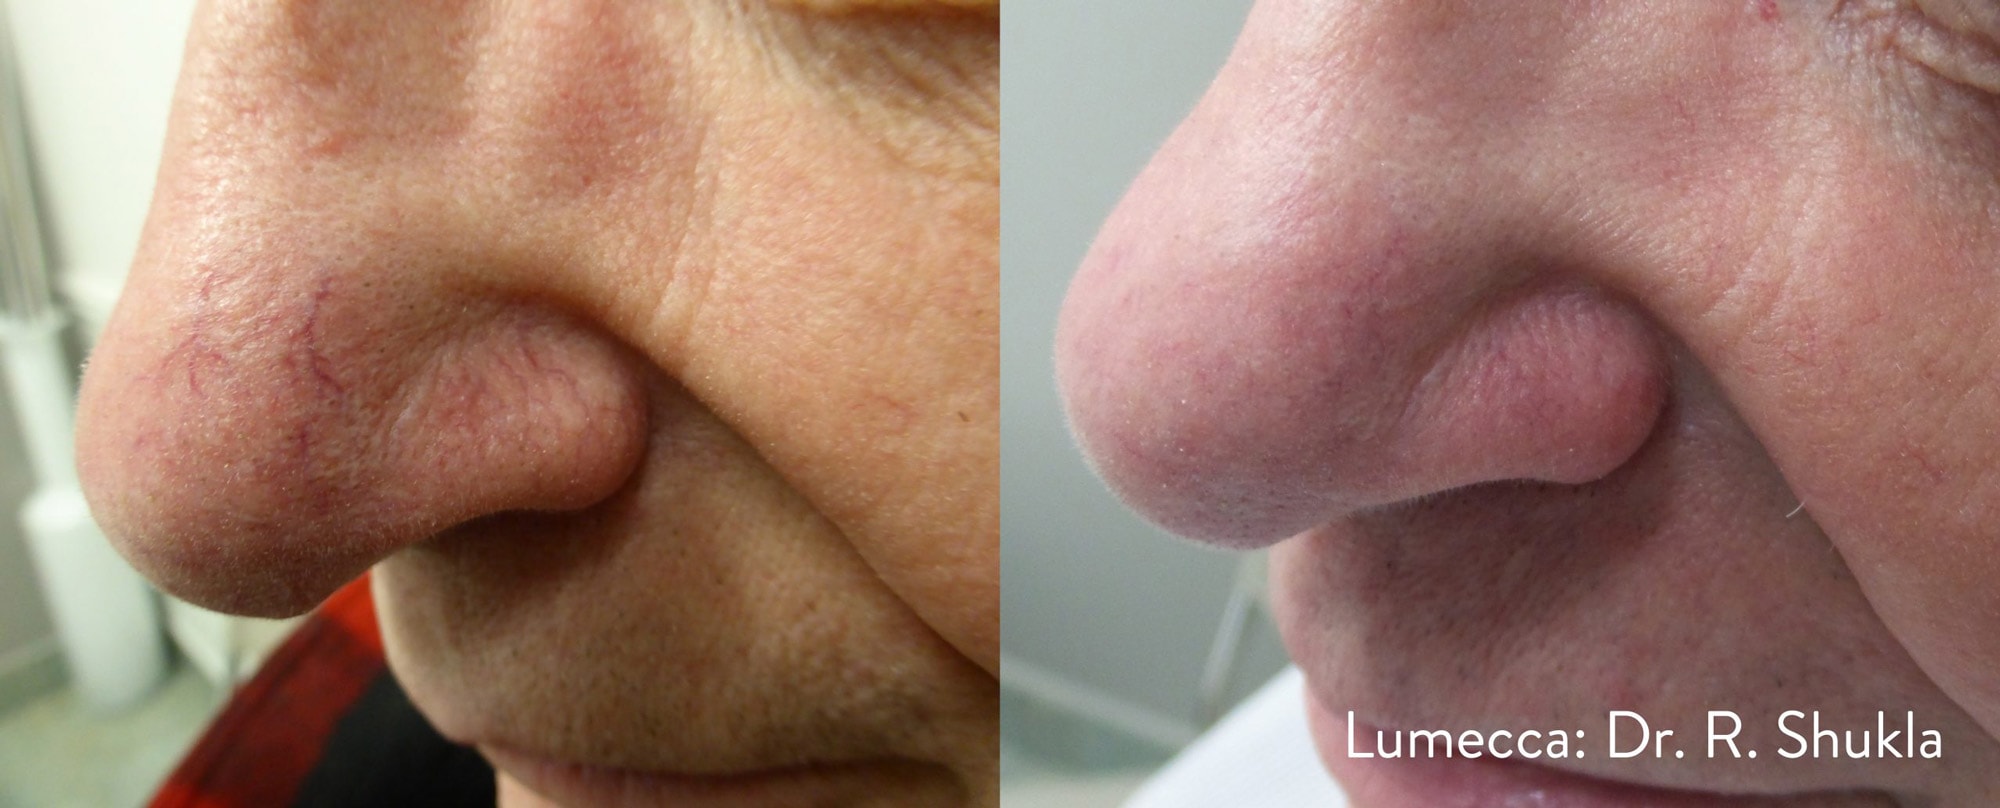 Before and After photos showing the results of Lumecca treatments eliminating broken blood vessels on a man’s nose